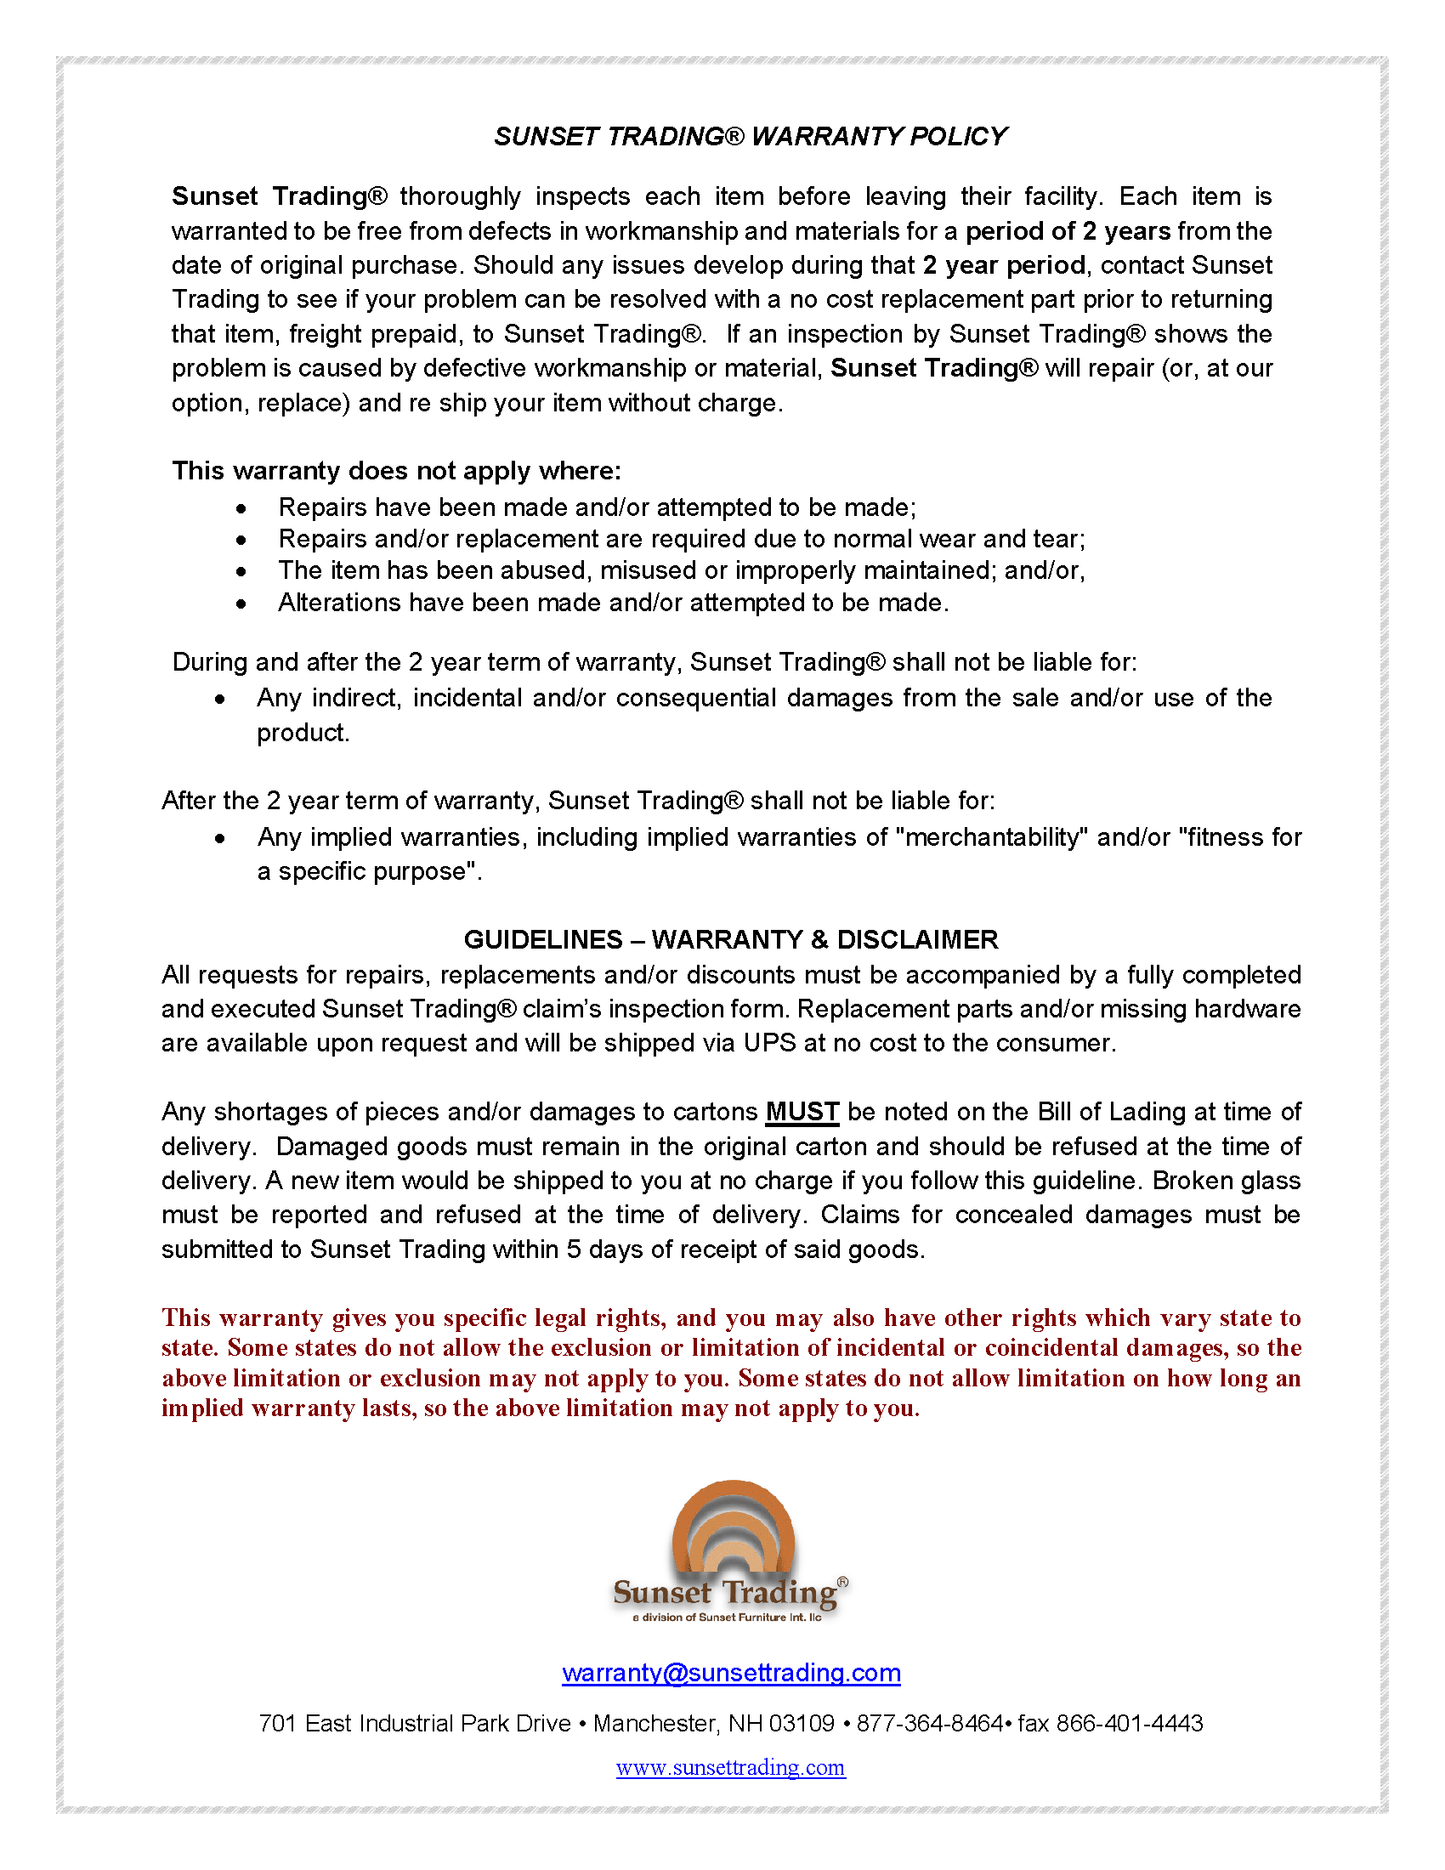 Sunset Trading Warranty Policy 